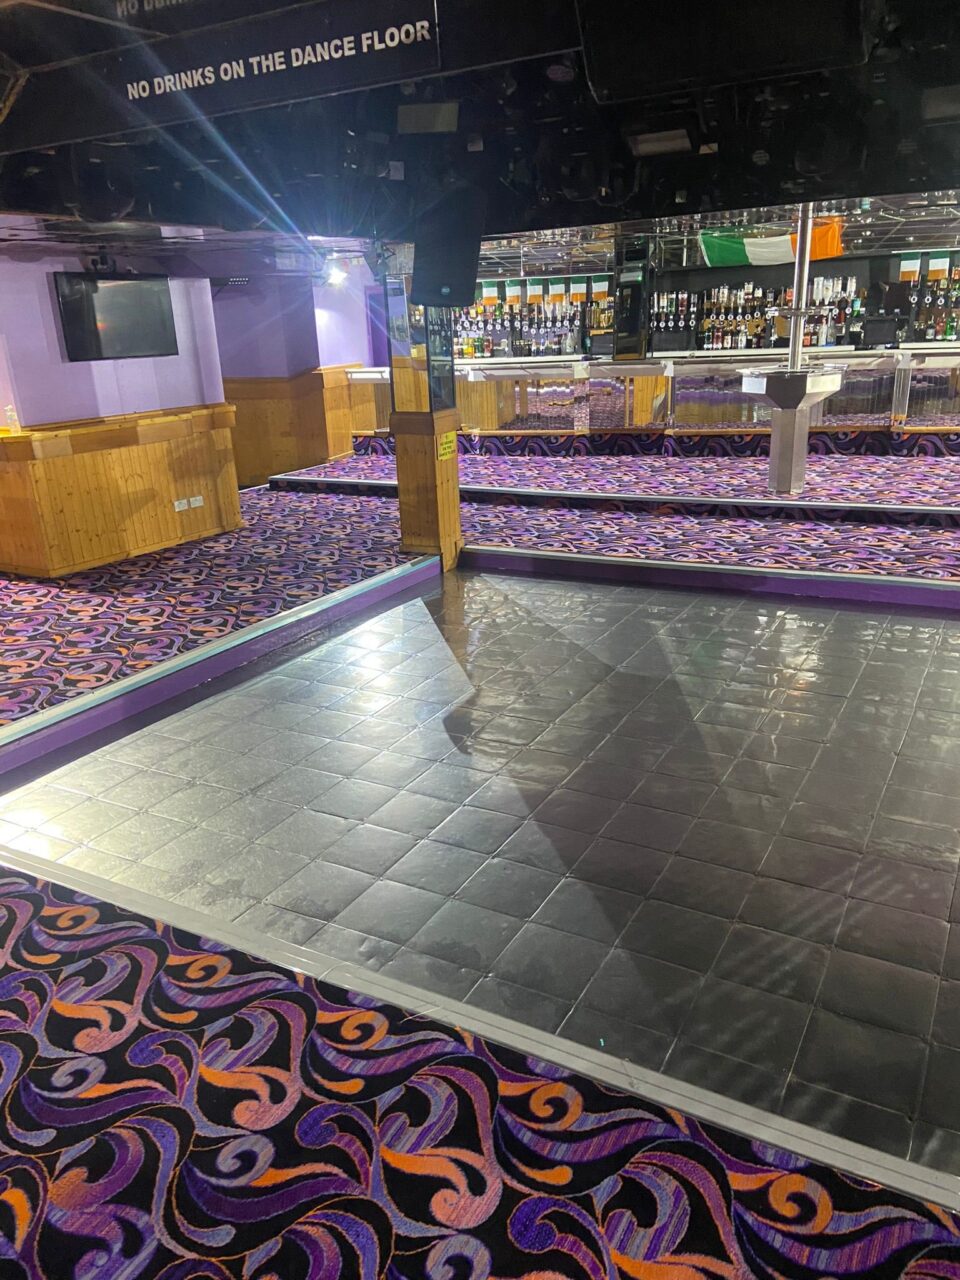 Acapulco Nightclub Halifax dance floor with bespoke purple and black patterned carpets designed by Wilton Carpets